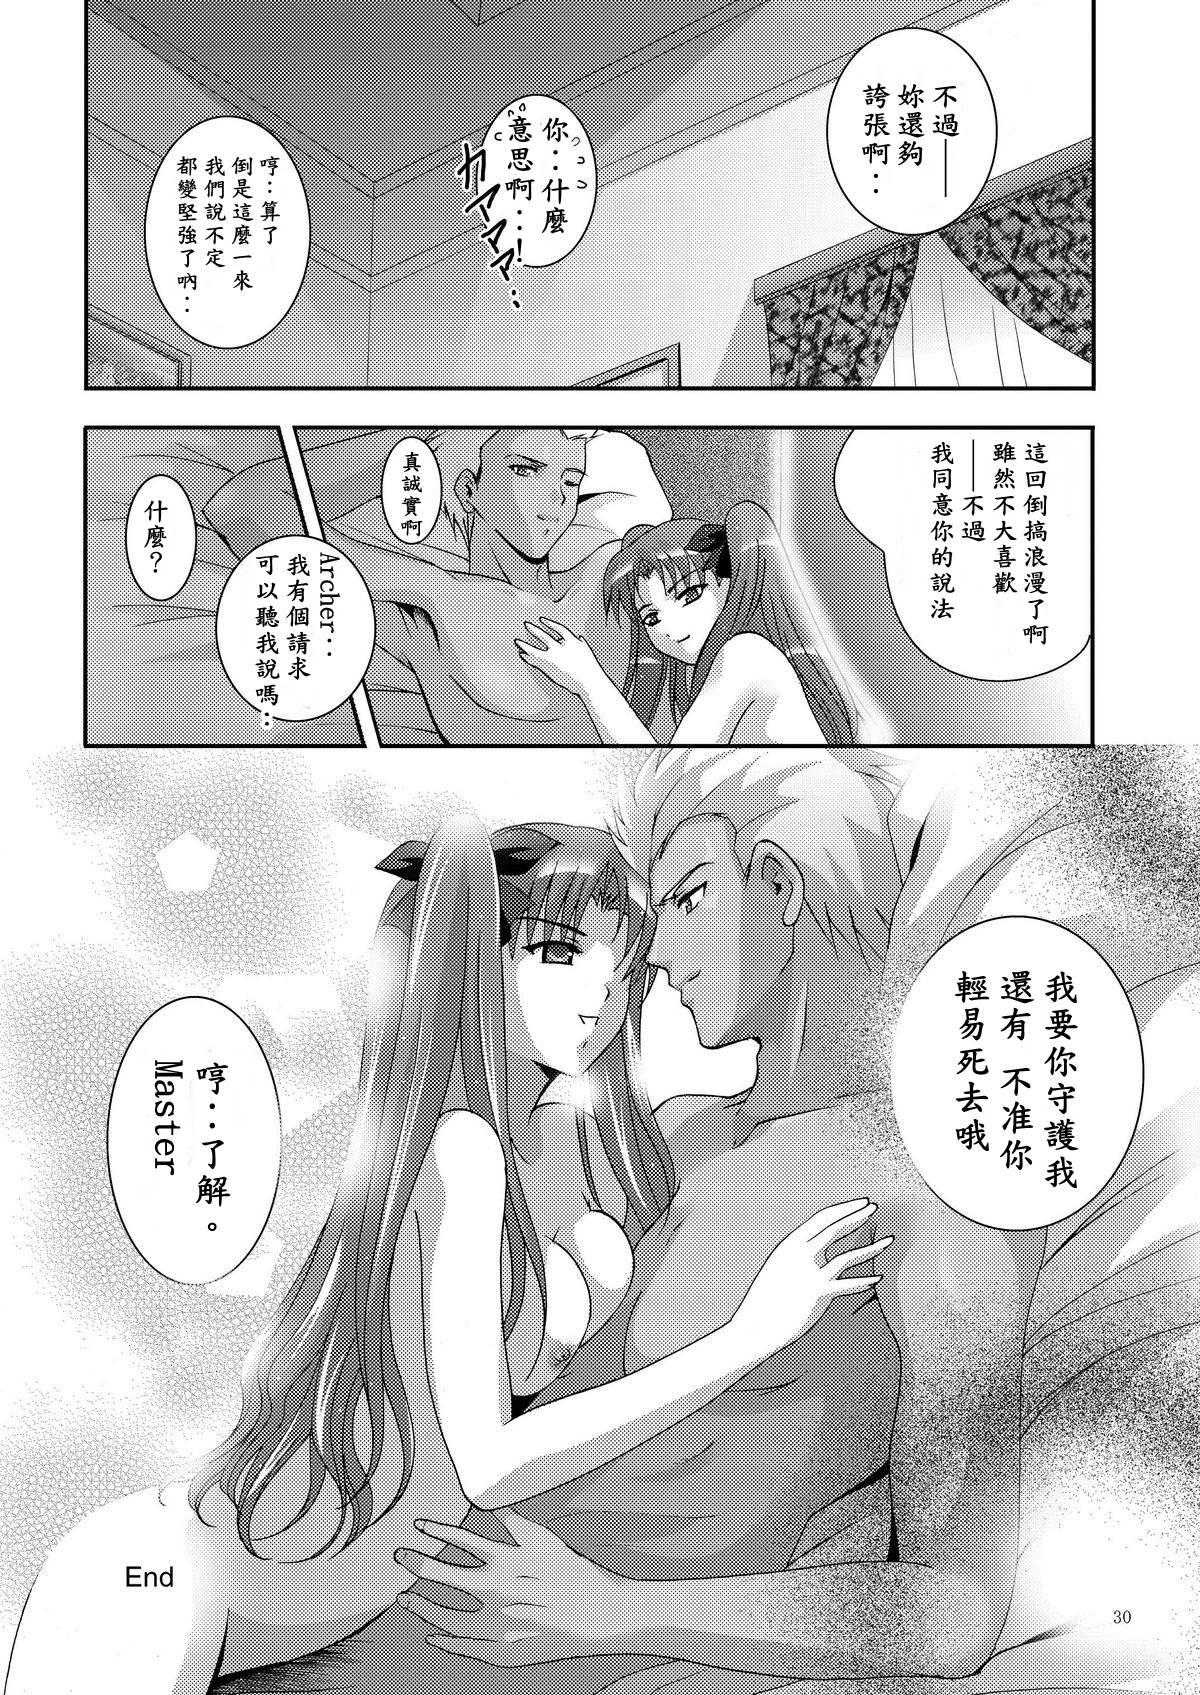 Bulge MOUSOU THEATER 19 - Fate stay night Pain - Page 28